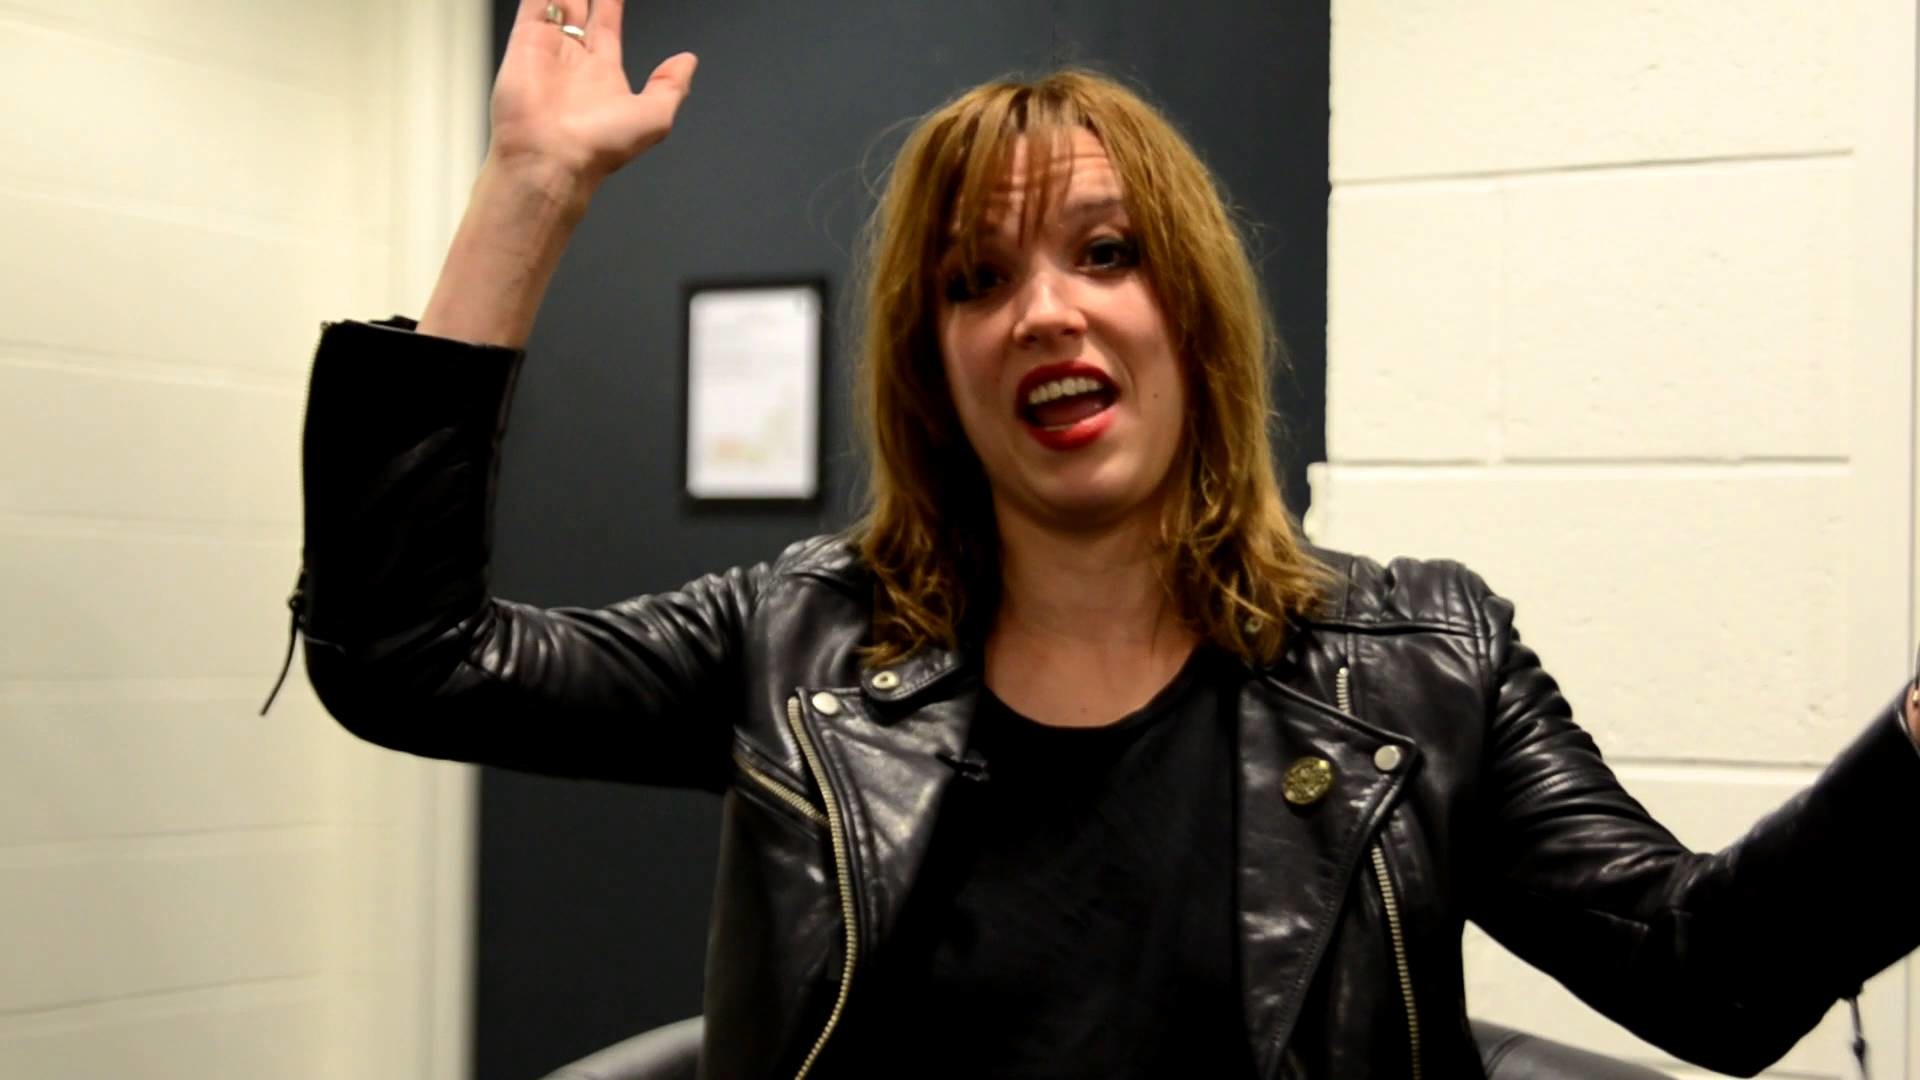 1920x1080 MOST EXTREME: Video Interview with Halestorm frontwoman Lzzy Hale (ME044) -  YouTube